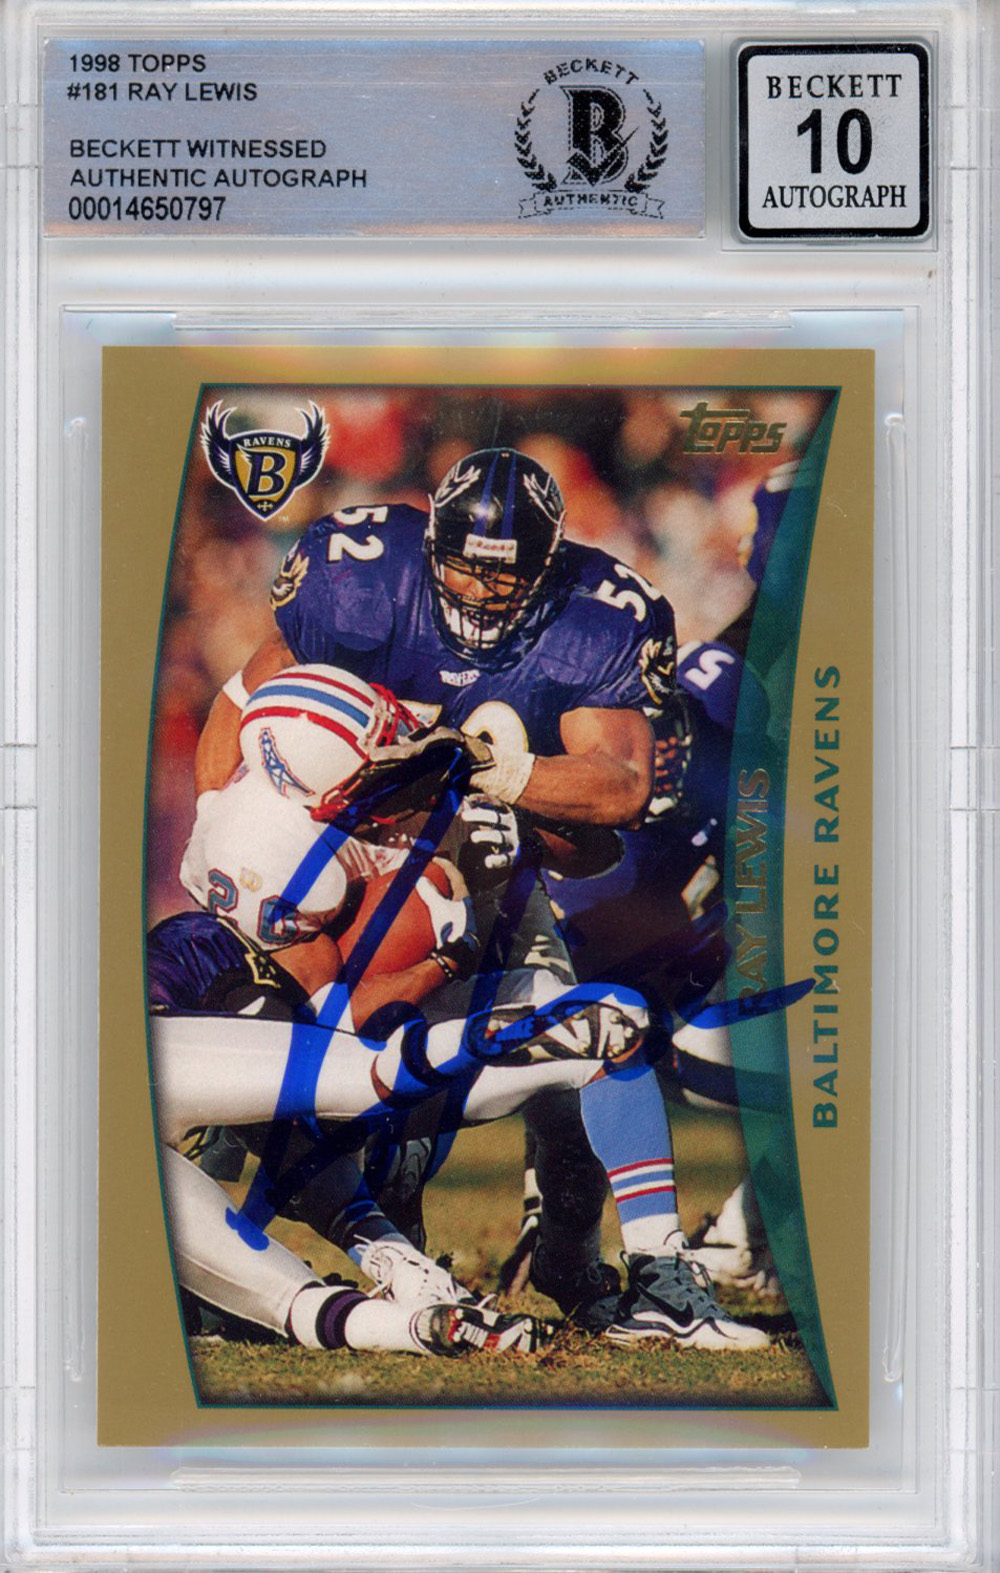 Ray Lewis Autographed/Signed 1998 Topps #181 Trading Card Beckett Slab